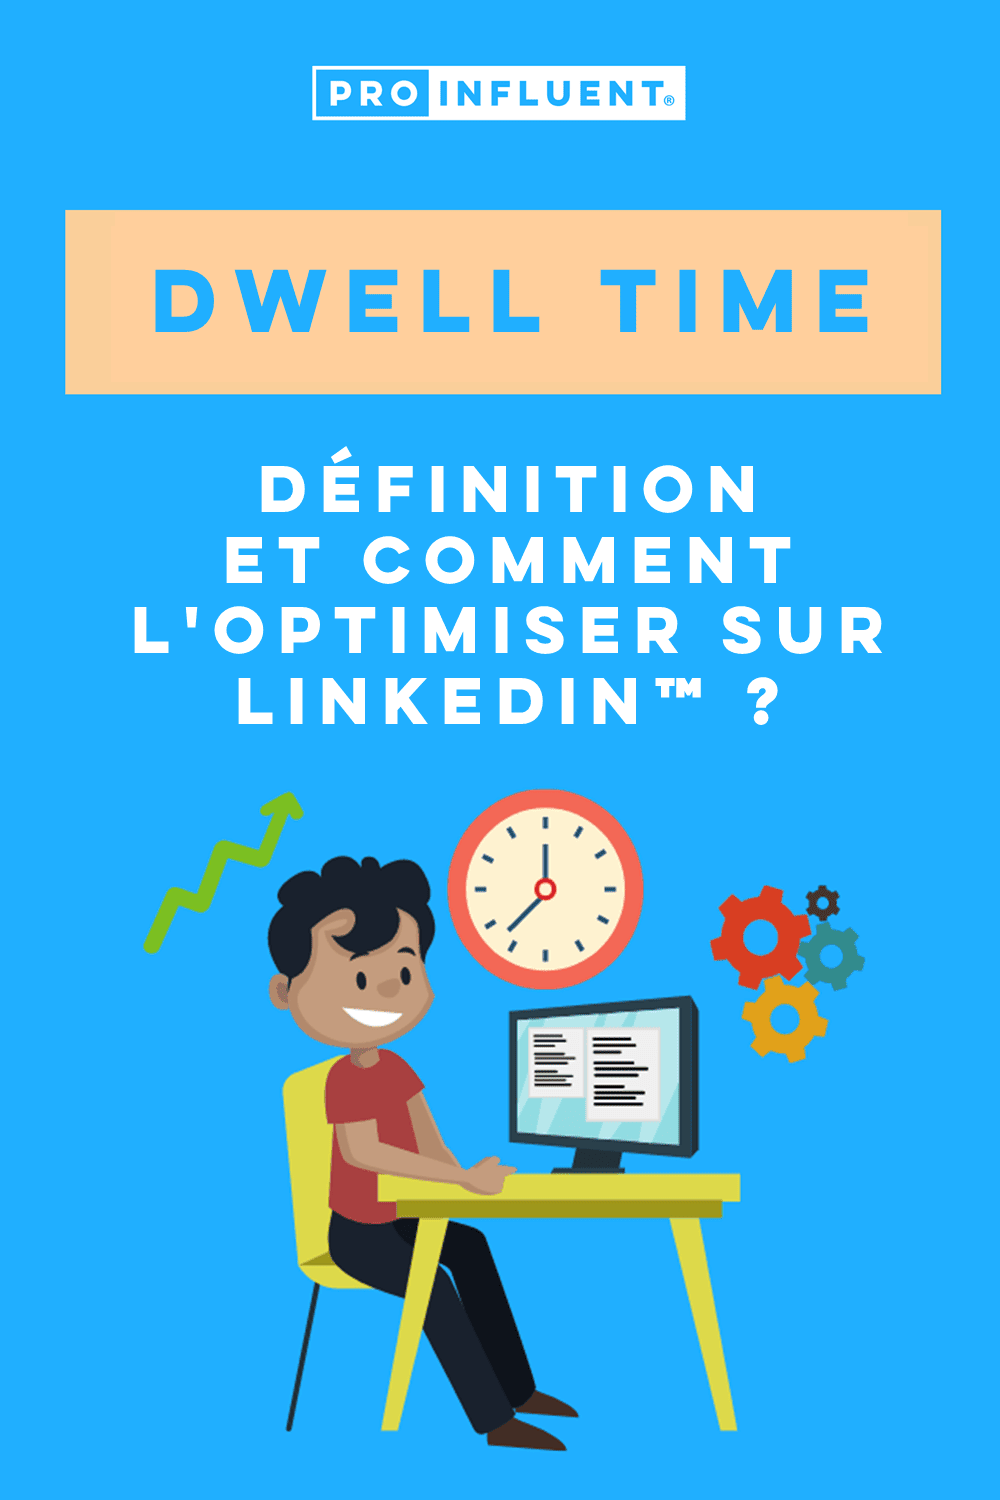 Dwell time, definition and how to optimize it on LinkedIn™?